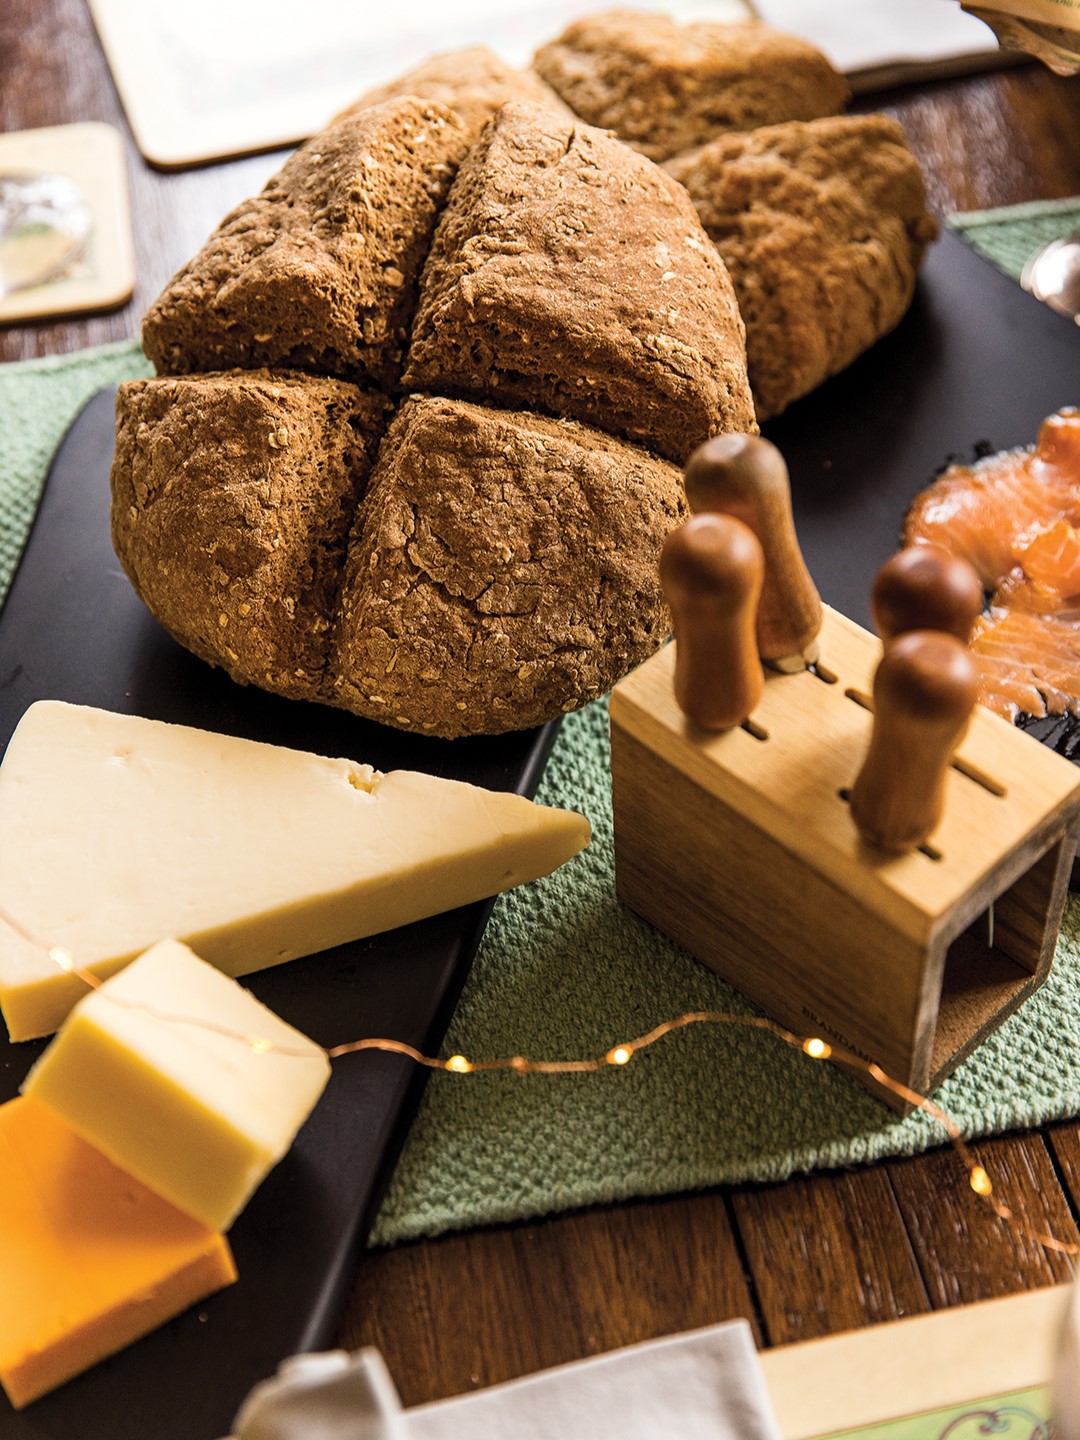 Irish Soda Bread appears at all hours of the day—breakfast, afternoon tea and an accompaniment at dinner.